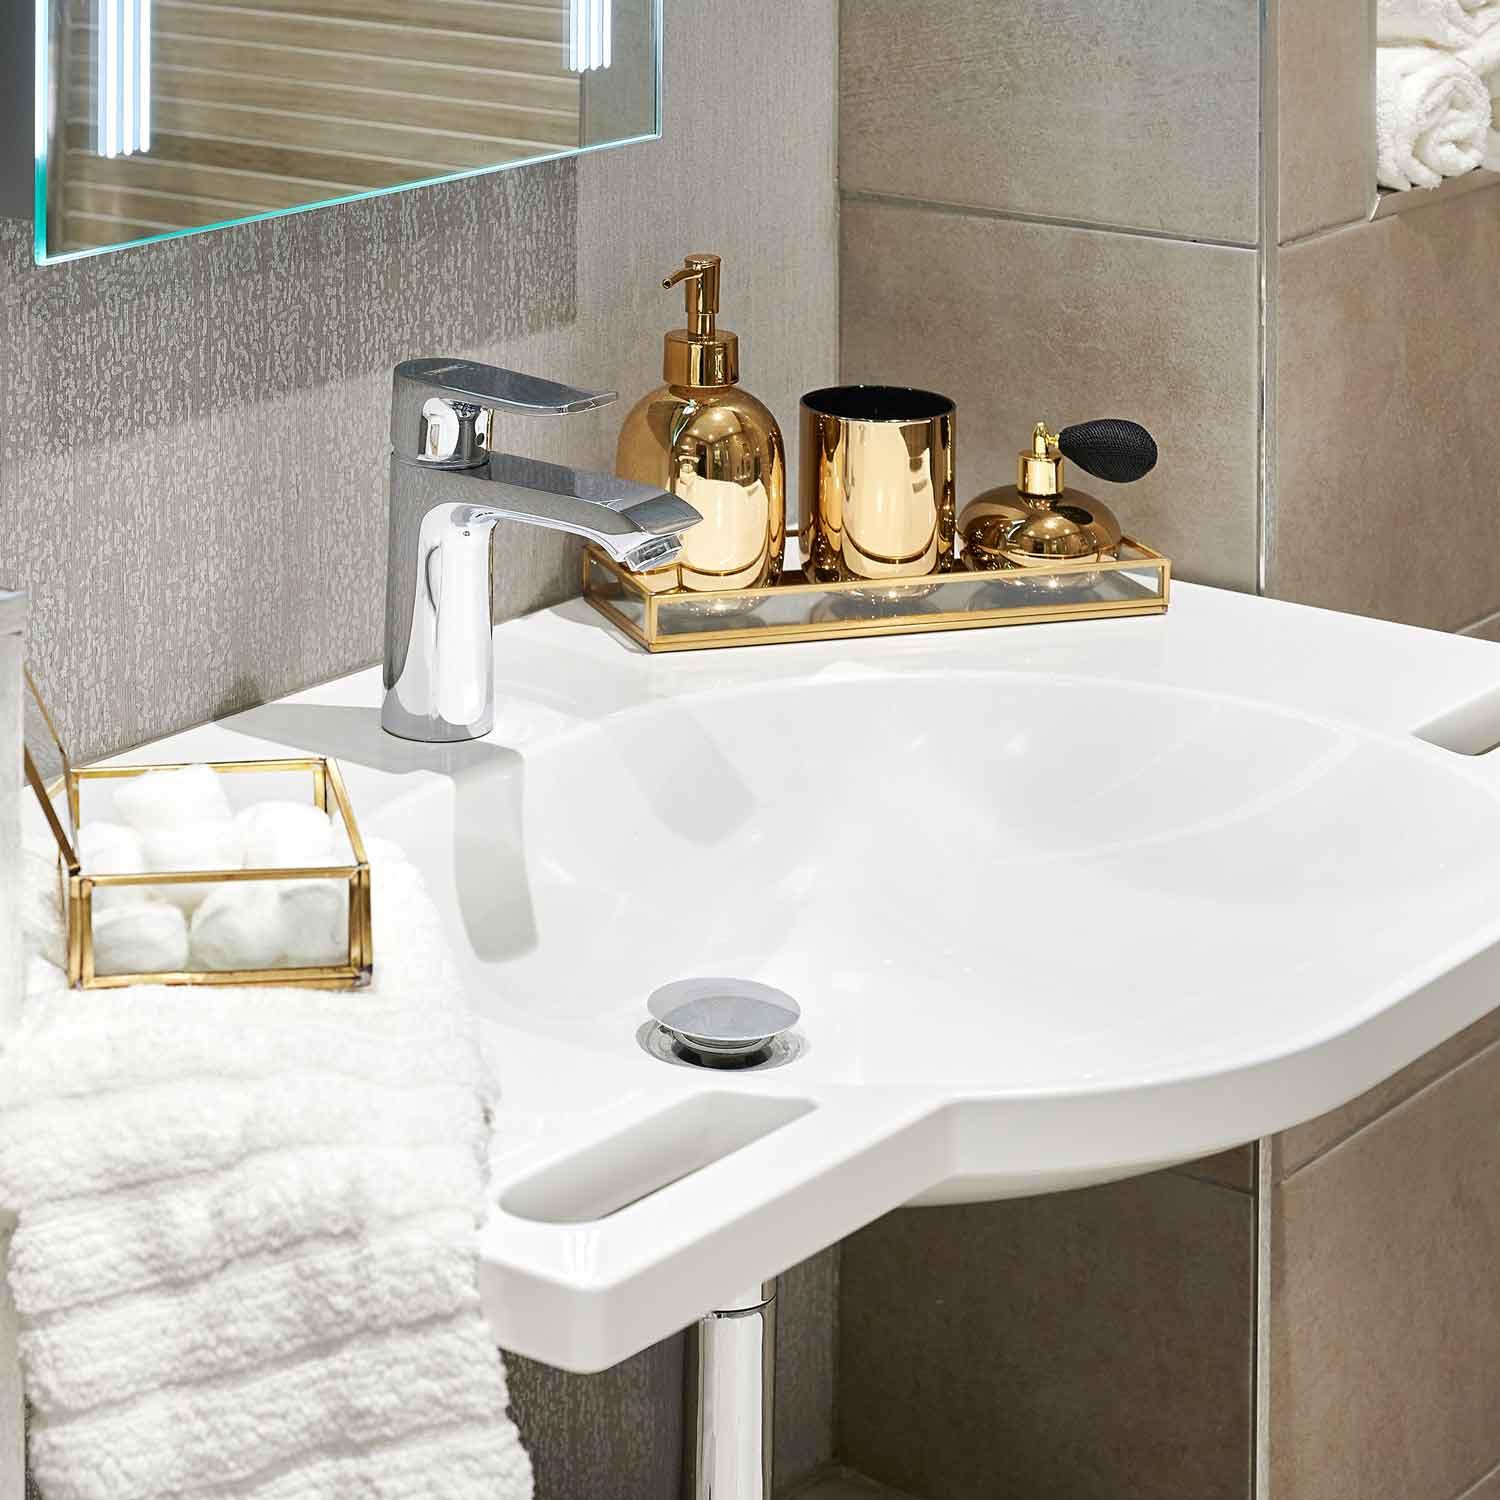 A Fine & Able SurfaceHold washbasin with hand grips and gold accessories on the countertop